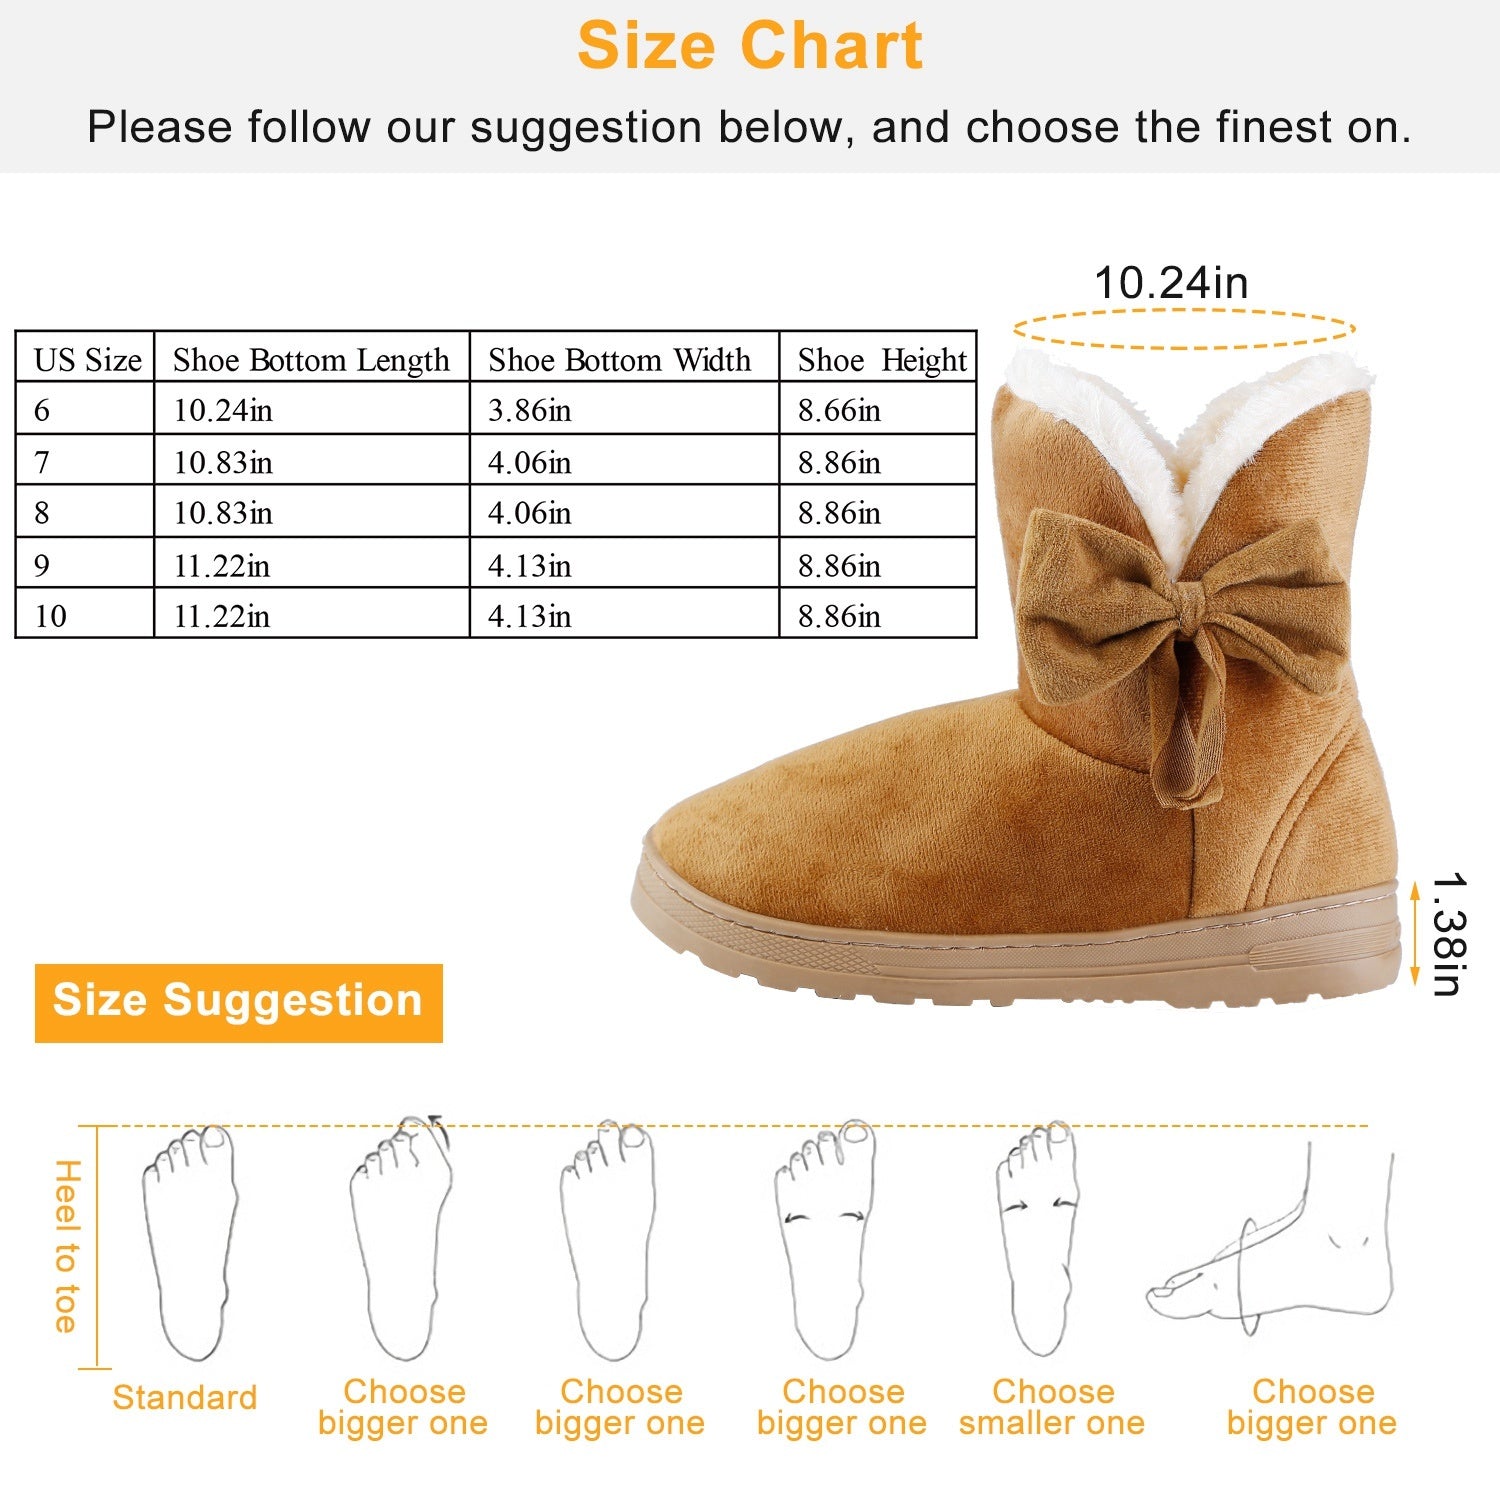 Women Ladies Snow Boots Super Soft Fabric Mid-Calf Winter Shoes Thickened Plush Warm Lining Shoes